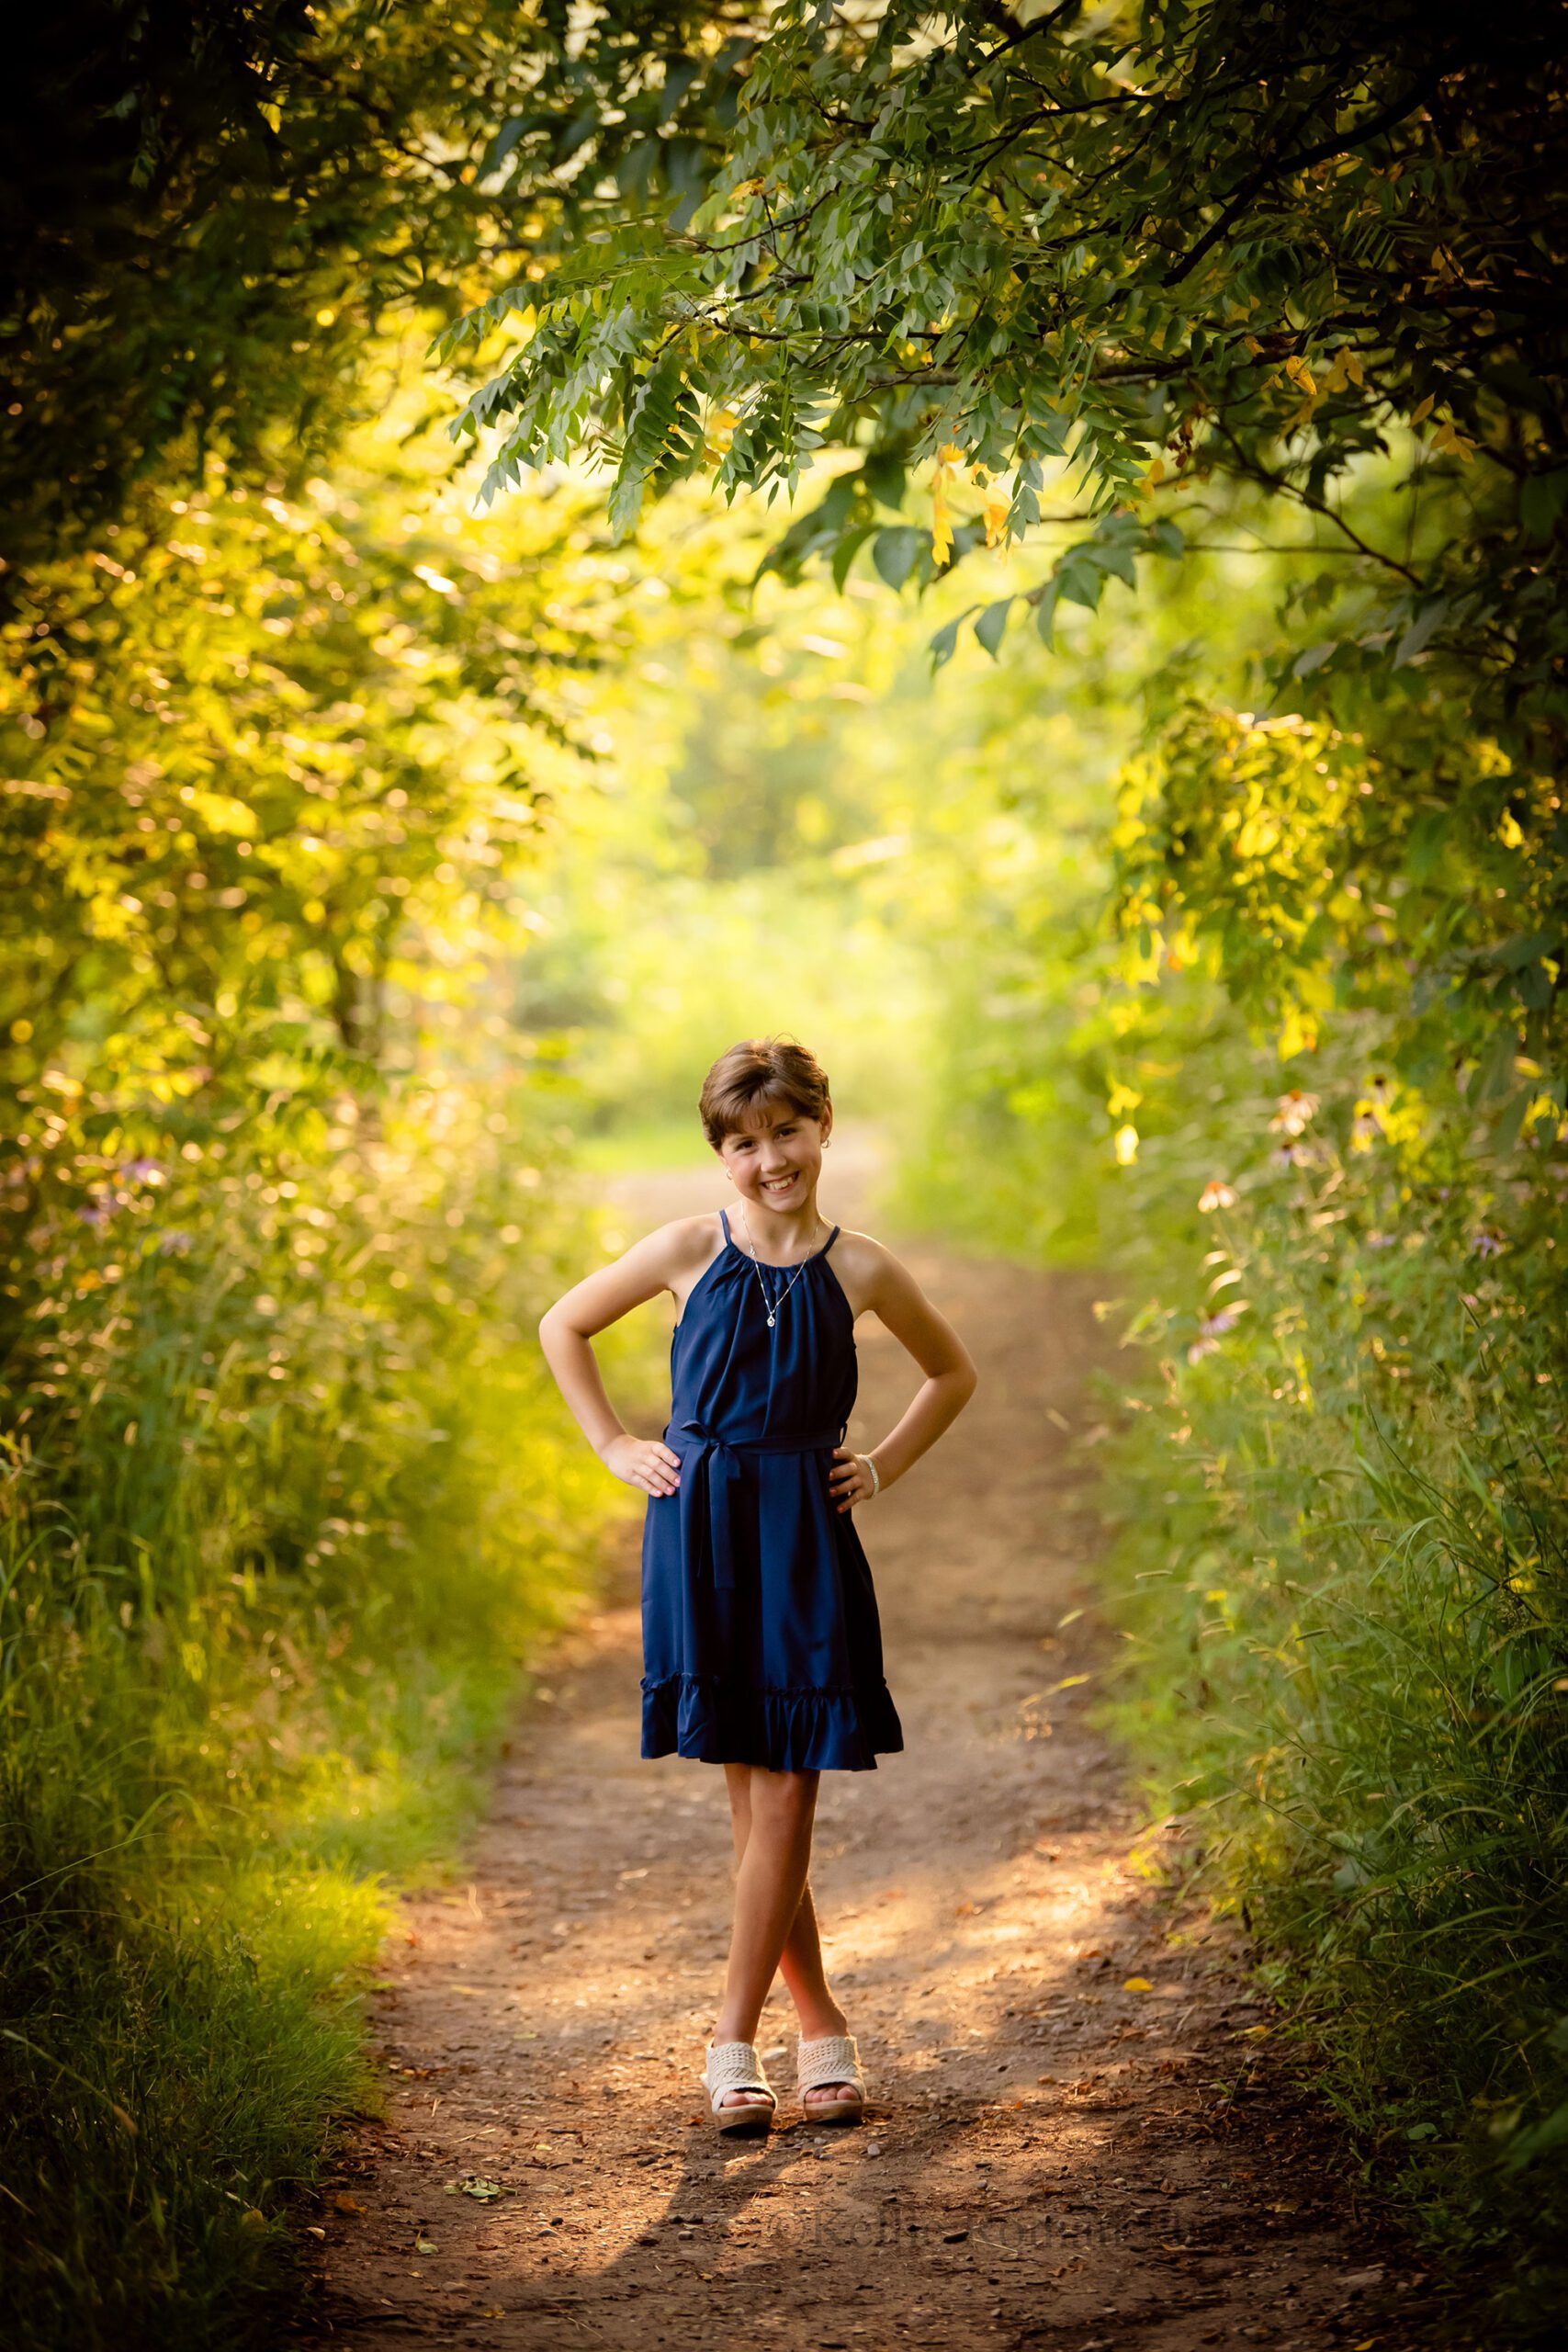 milwaukee birthday photos. 10 year old girl surrounded by trees in park is standing on dirt path. she has her hands on her hips and is wearing a navy dress with tan sandals.